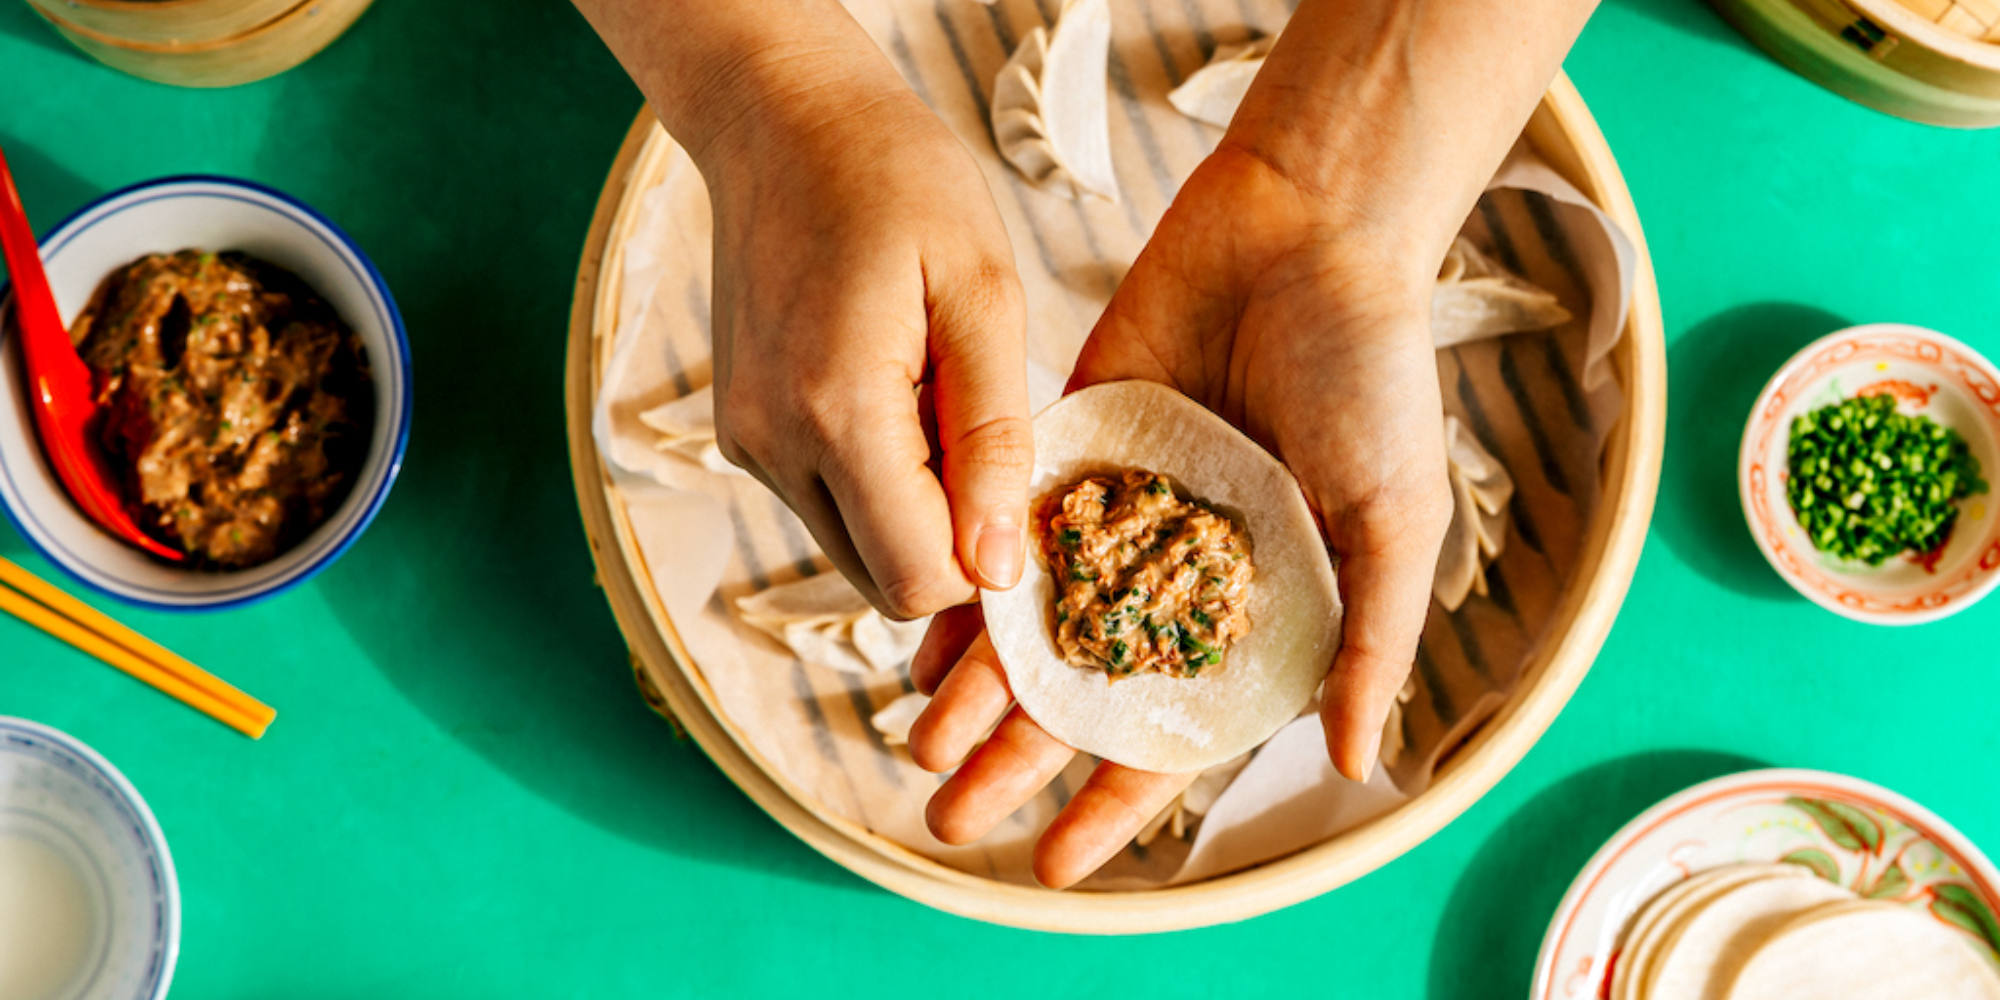 Tapping into food innovation opportunities in SE Asia